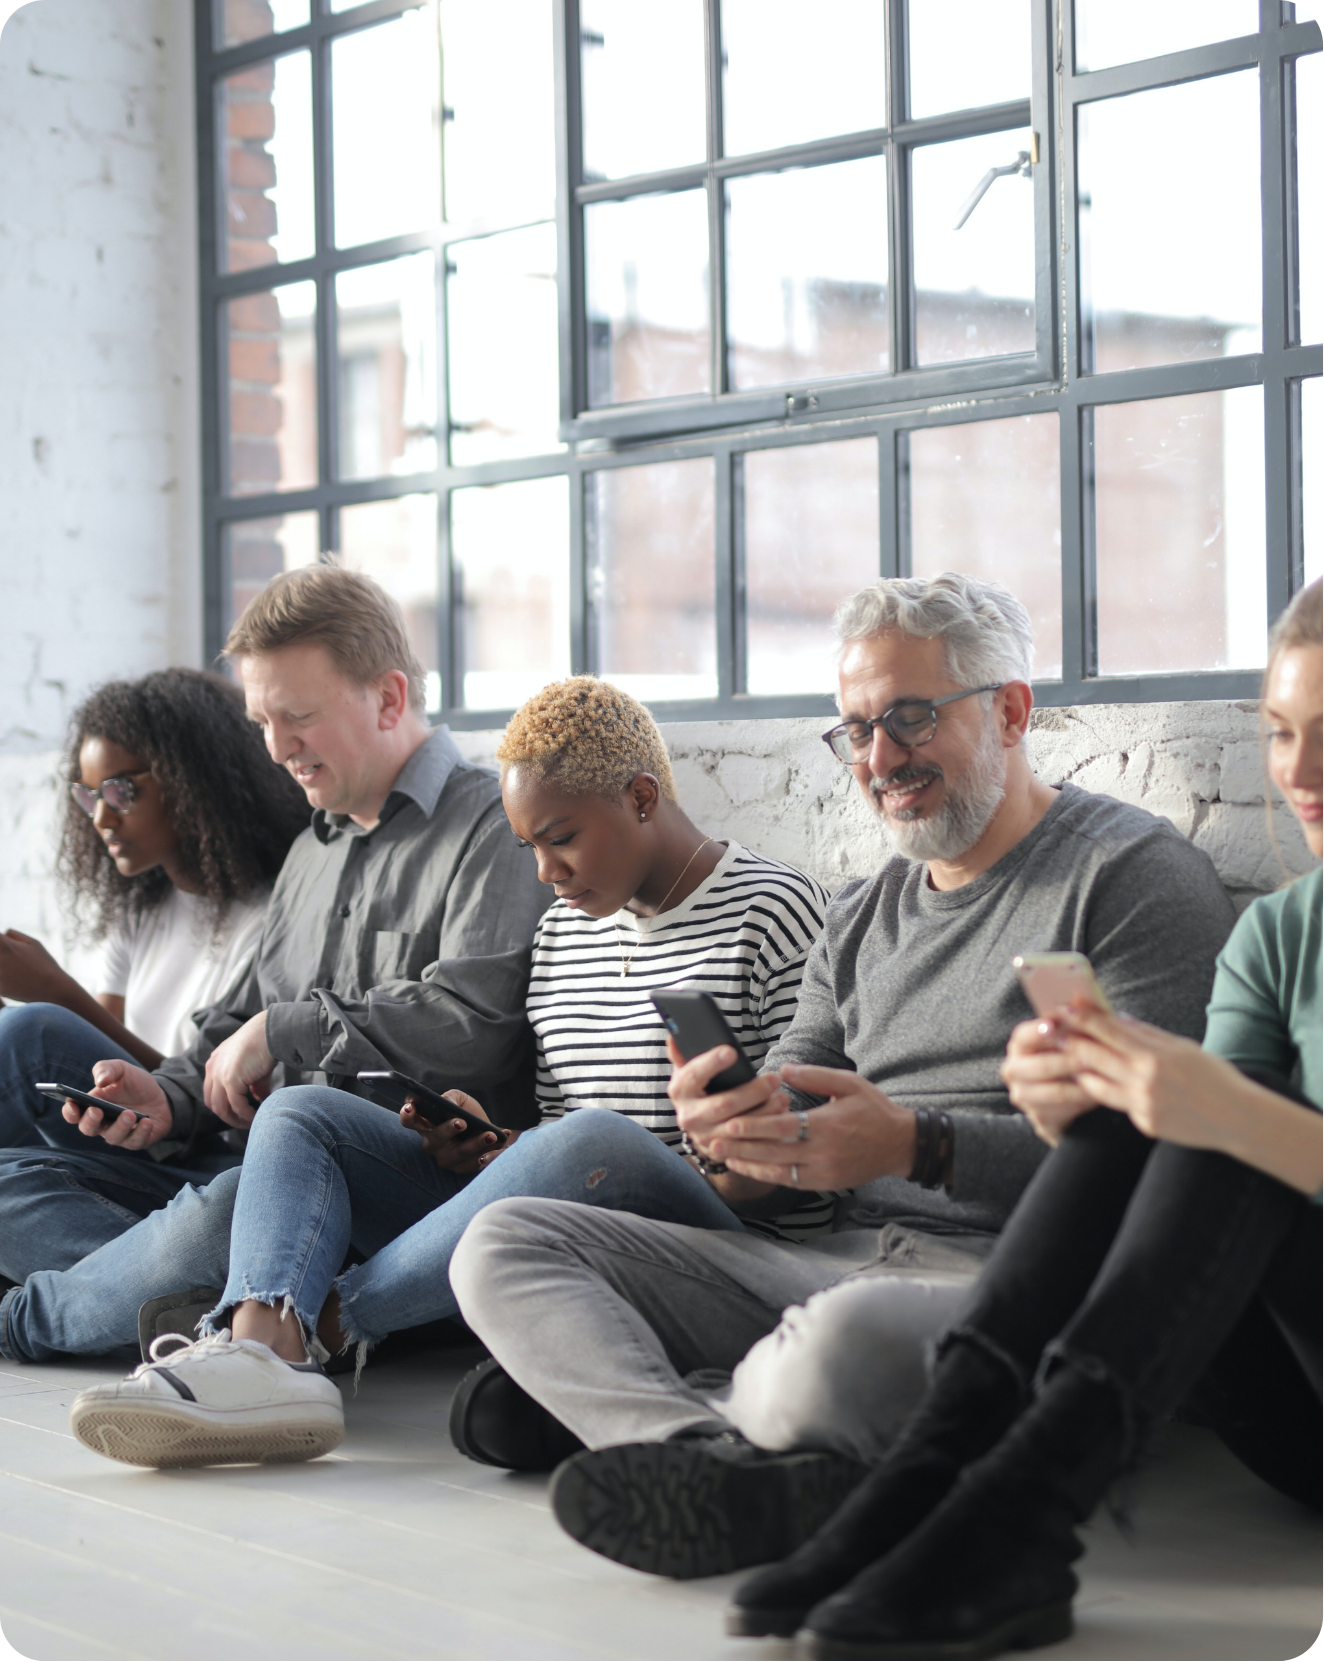 several people sitting on the floor against a wall and looking at their phones